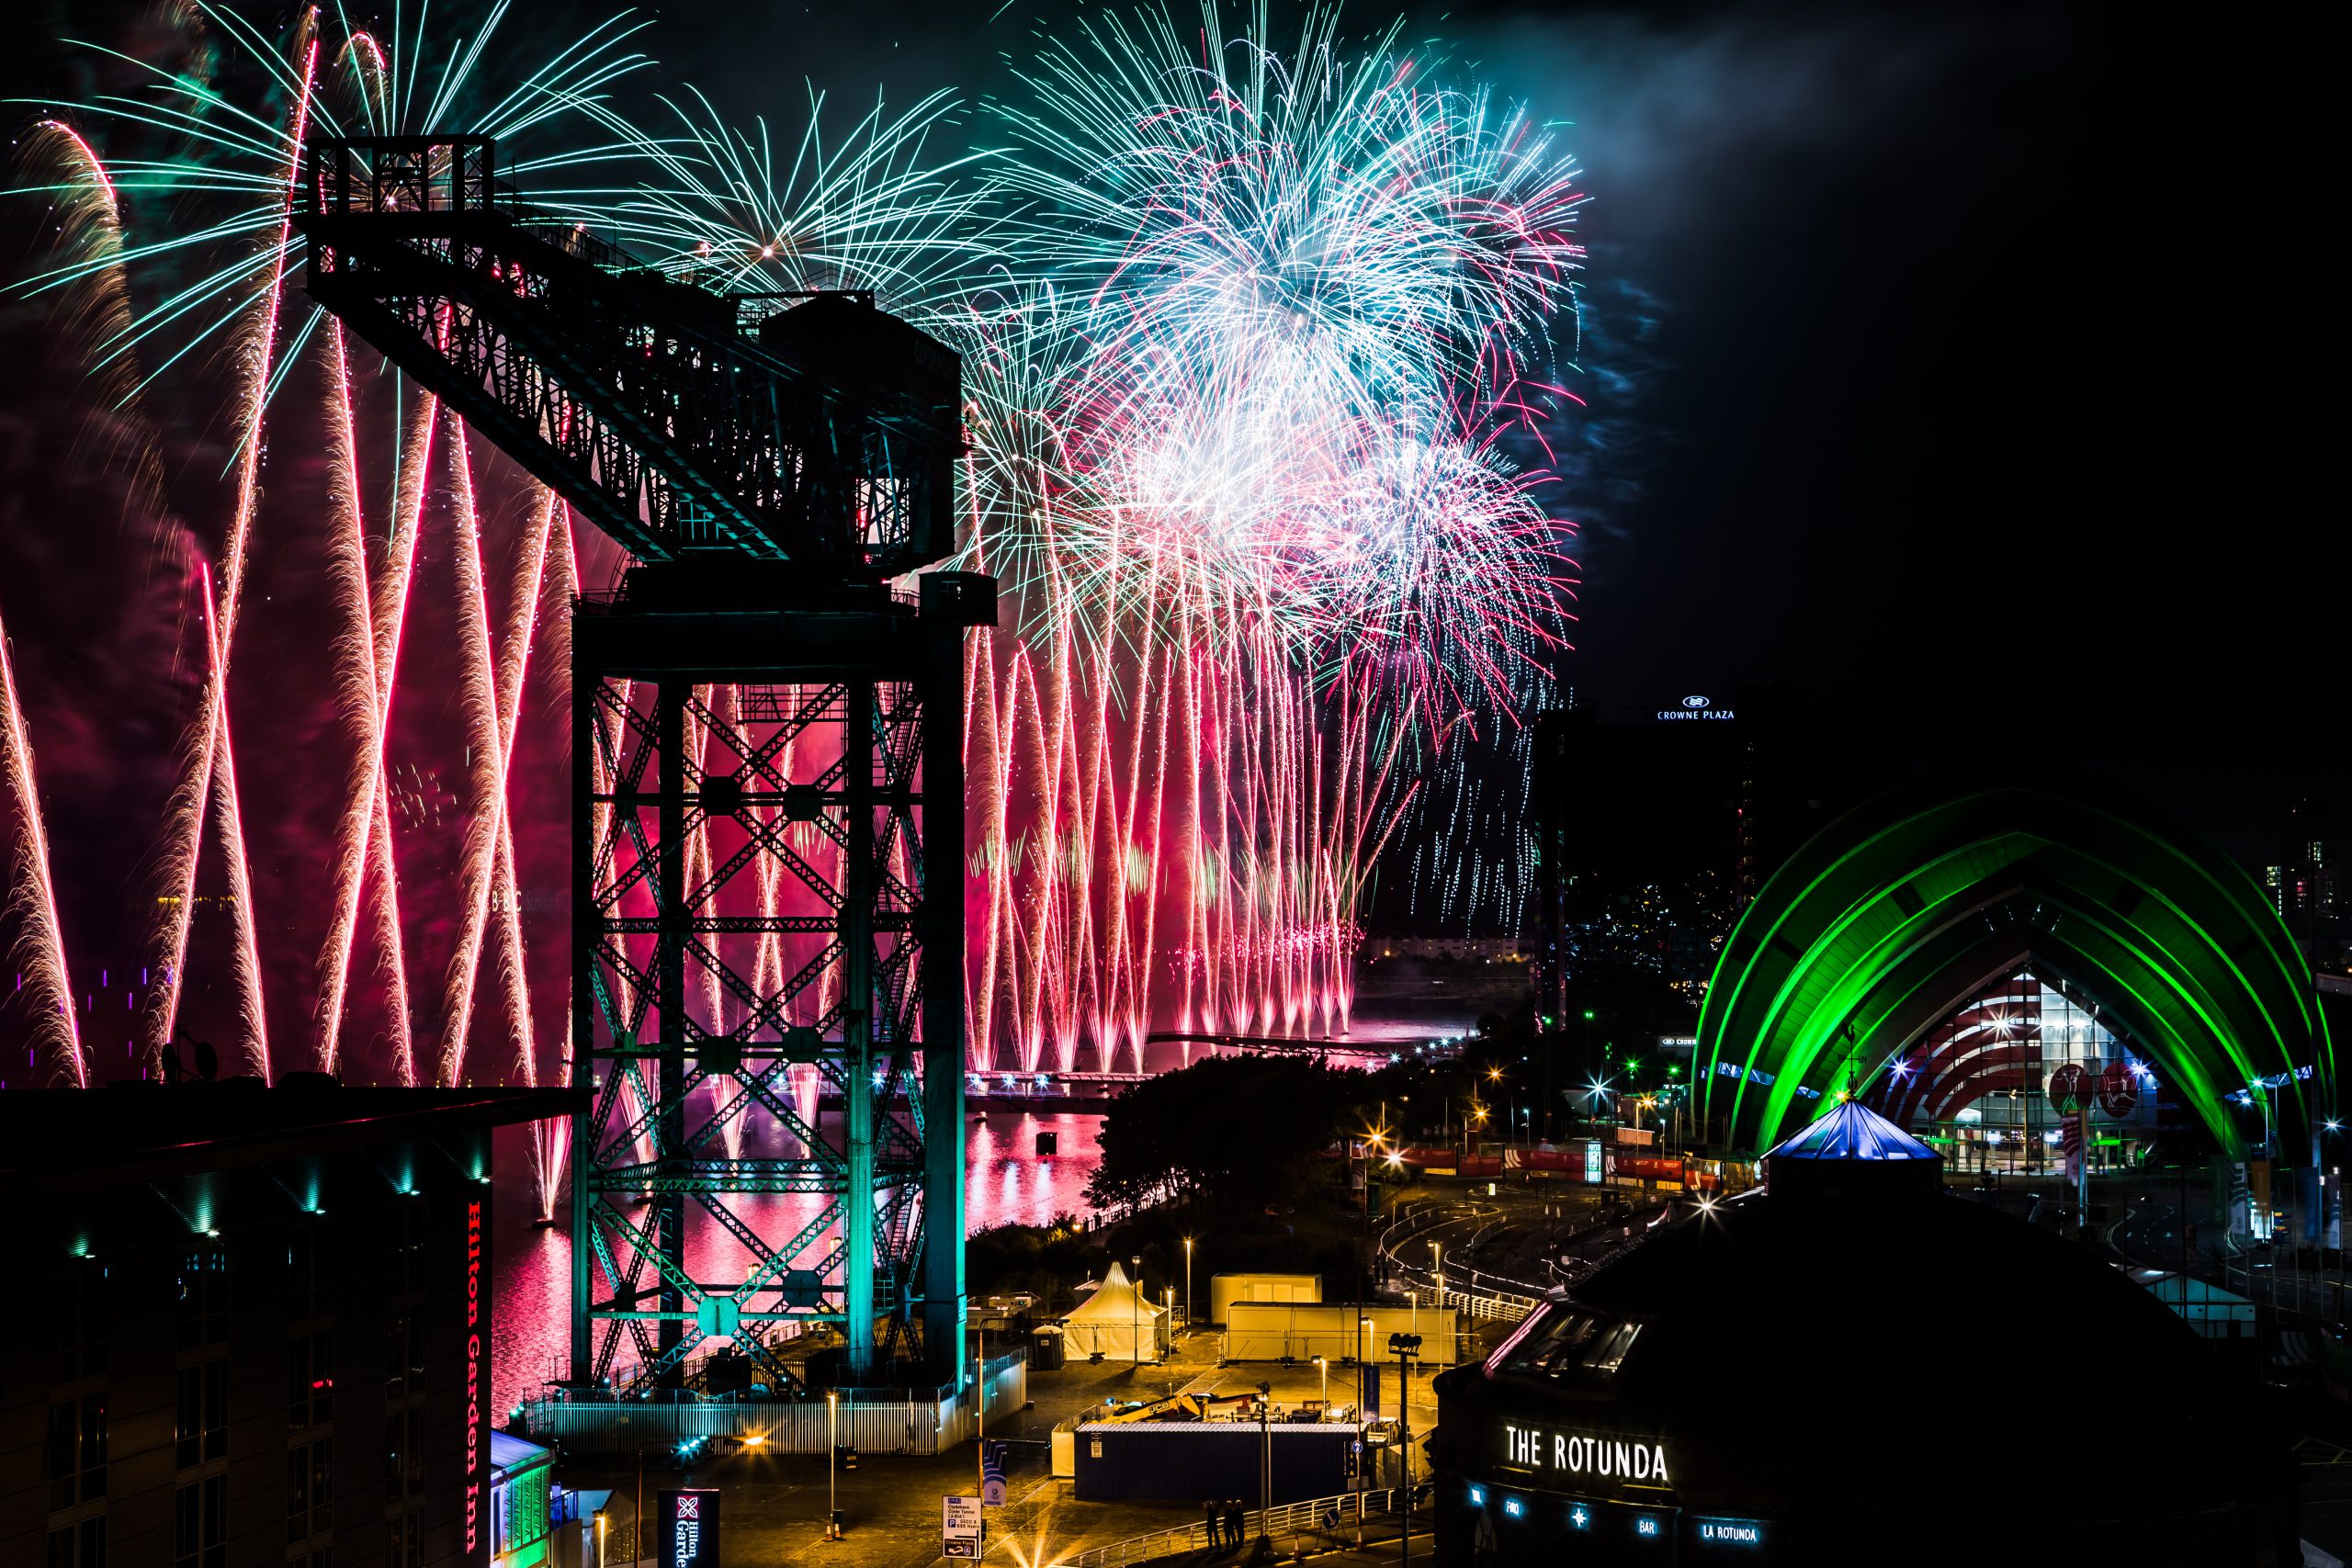 Glasgow, red fireworks, river clyde, opening ceremony, fireworks, blue fireworks, pyrotechnics, titanium fireworks, commonwealth games,